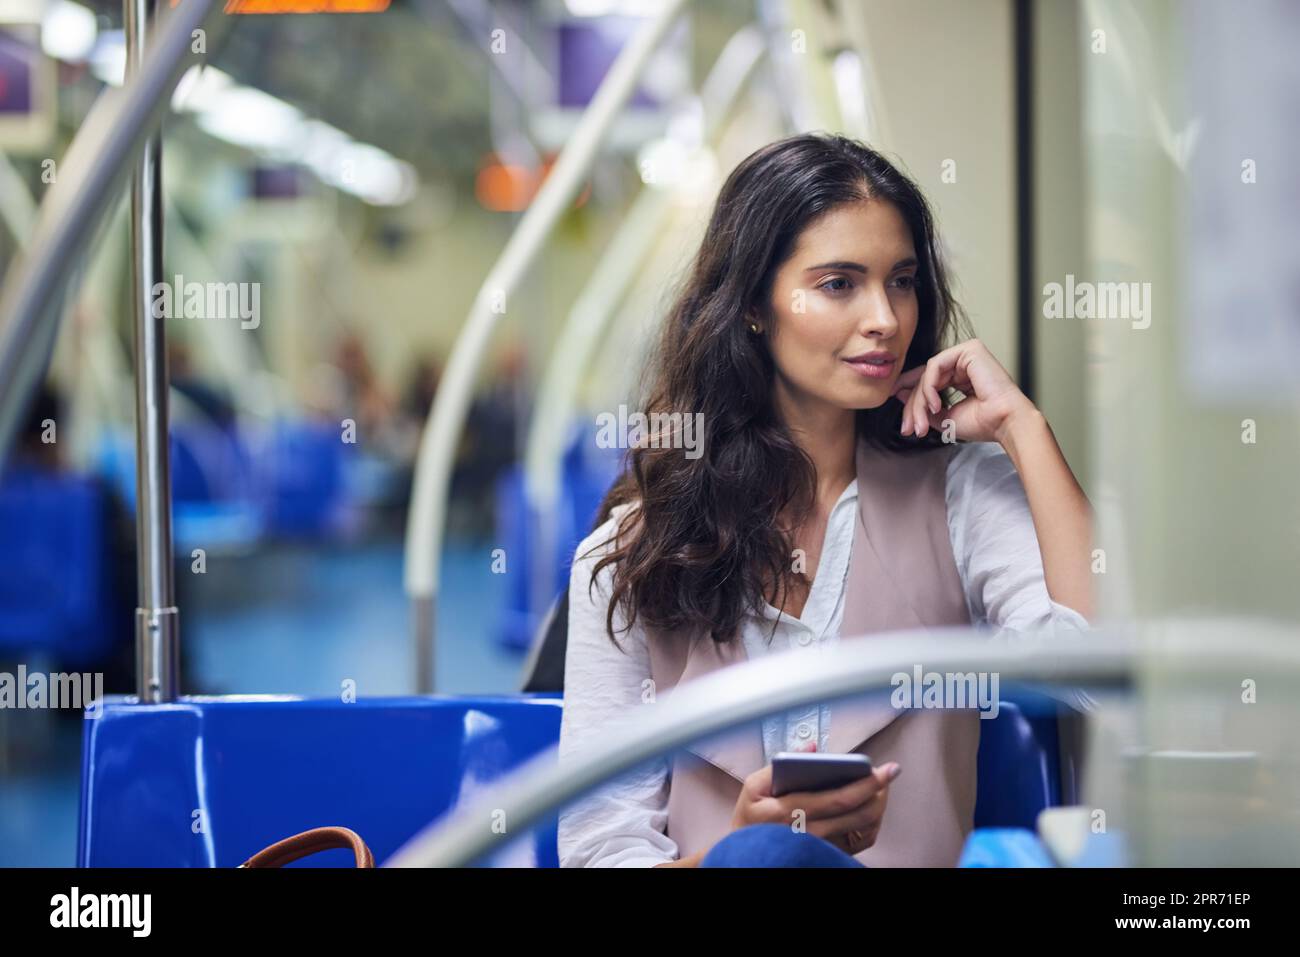 The train can sometimes be a great place to think. Cropped shot of a young attractive woman using a cellphone while commuting with the train. Stock Photo